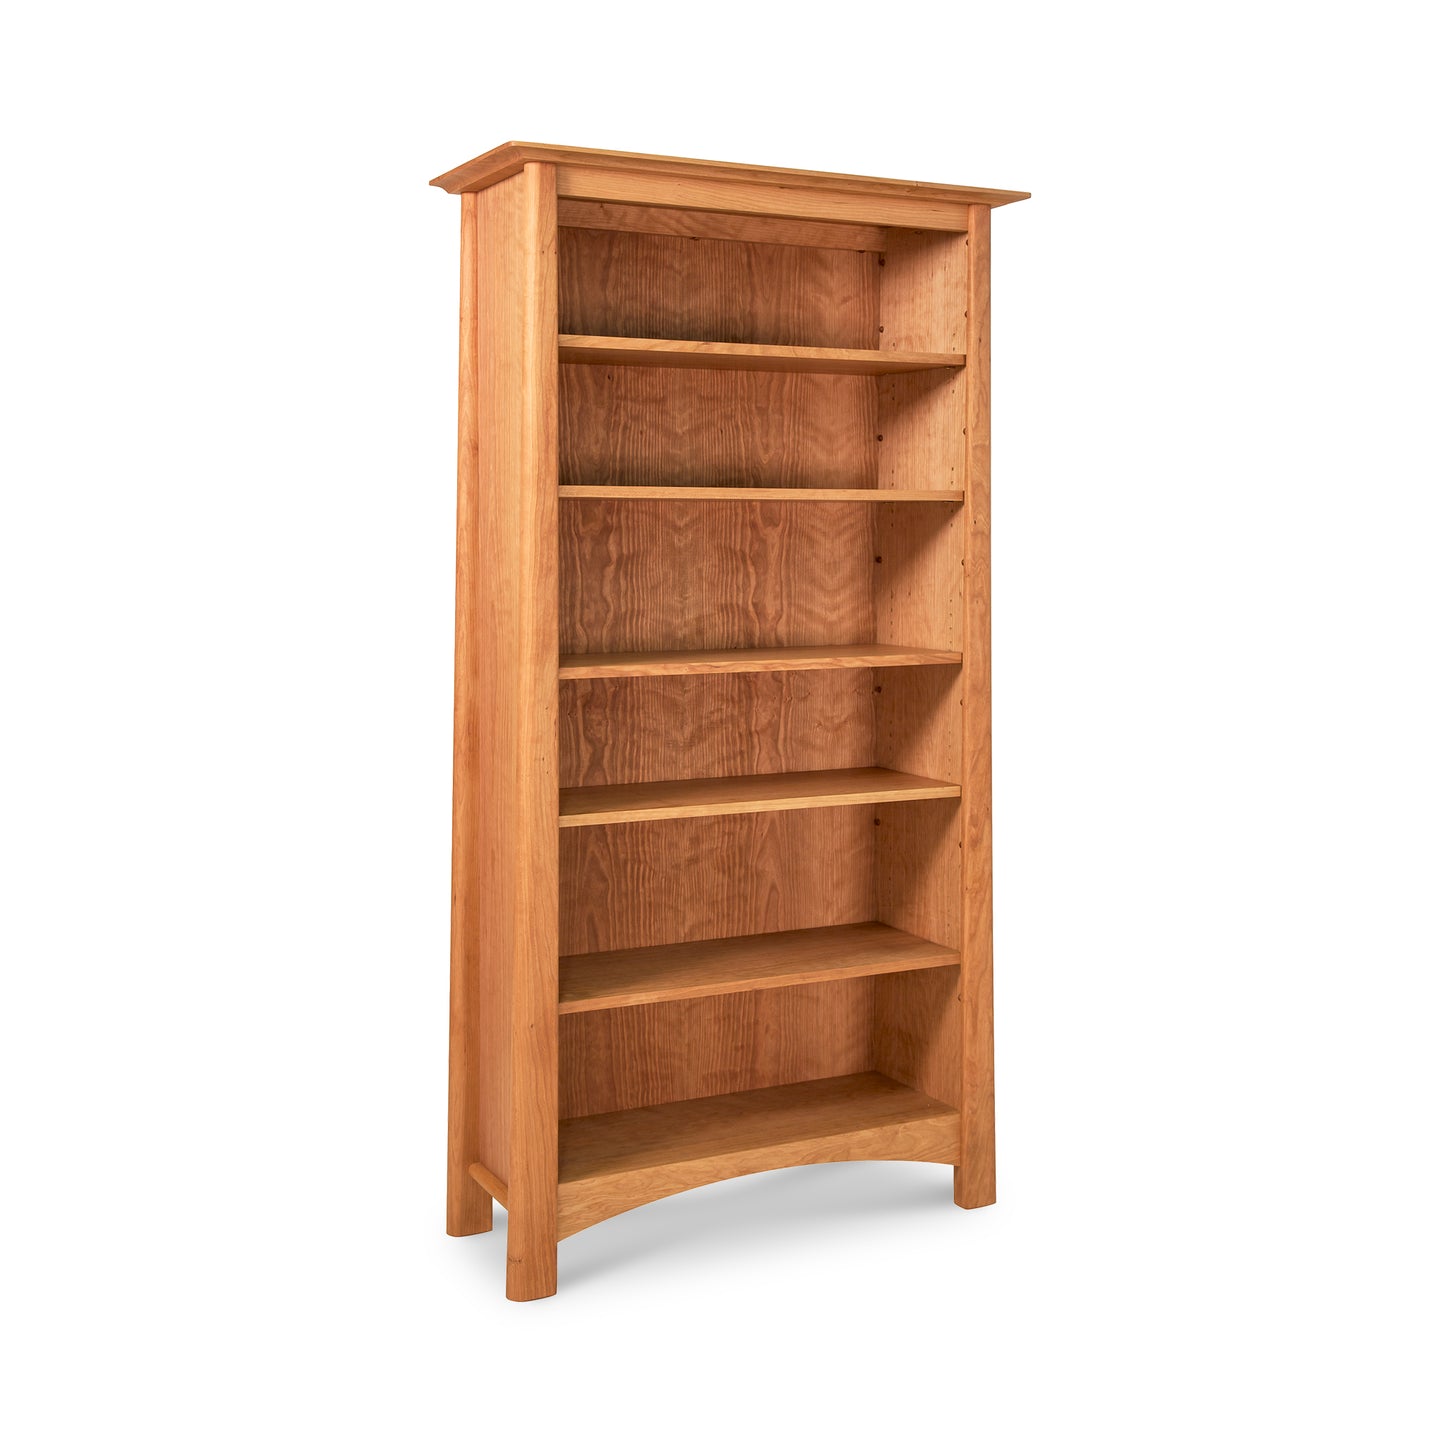 Cherry Moon Bookcase by Maple Corner Woodworks, with five shelves, isolated on a white background, crafted from sustainably harvested hardwoods.